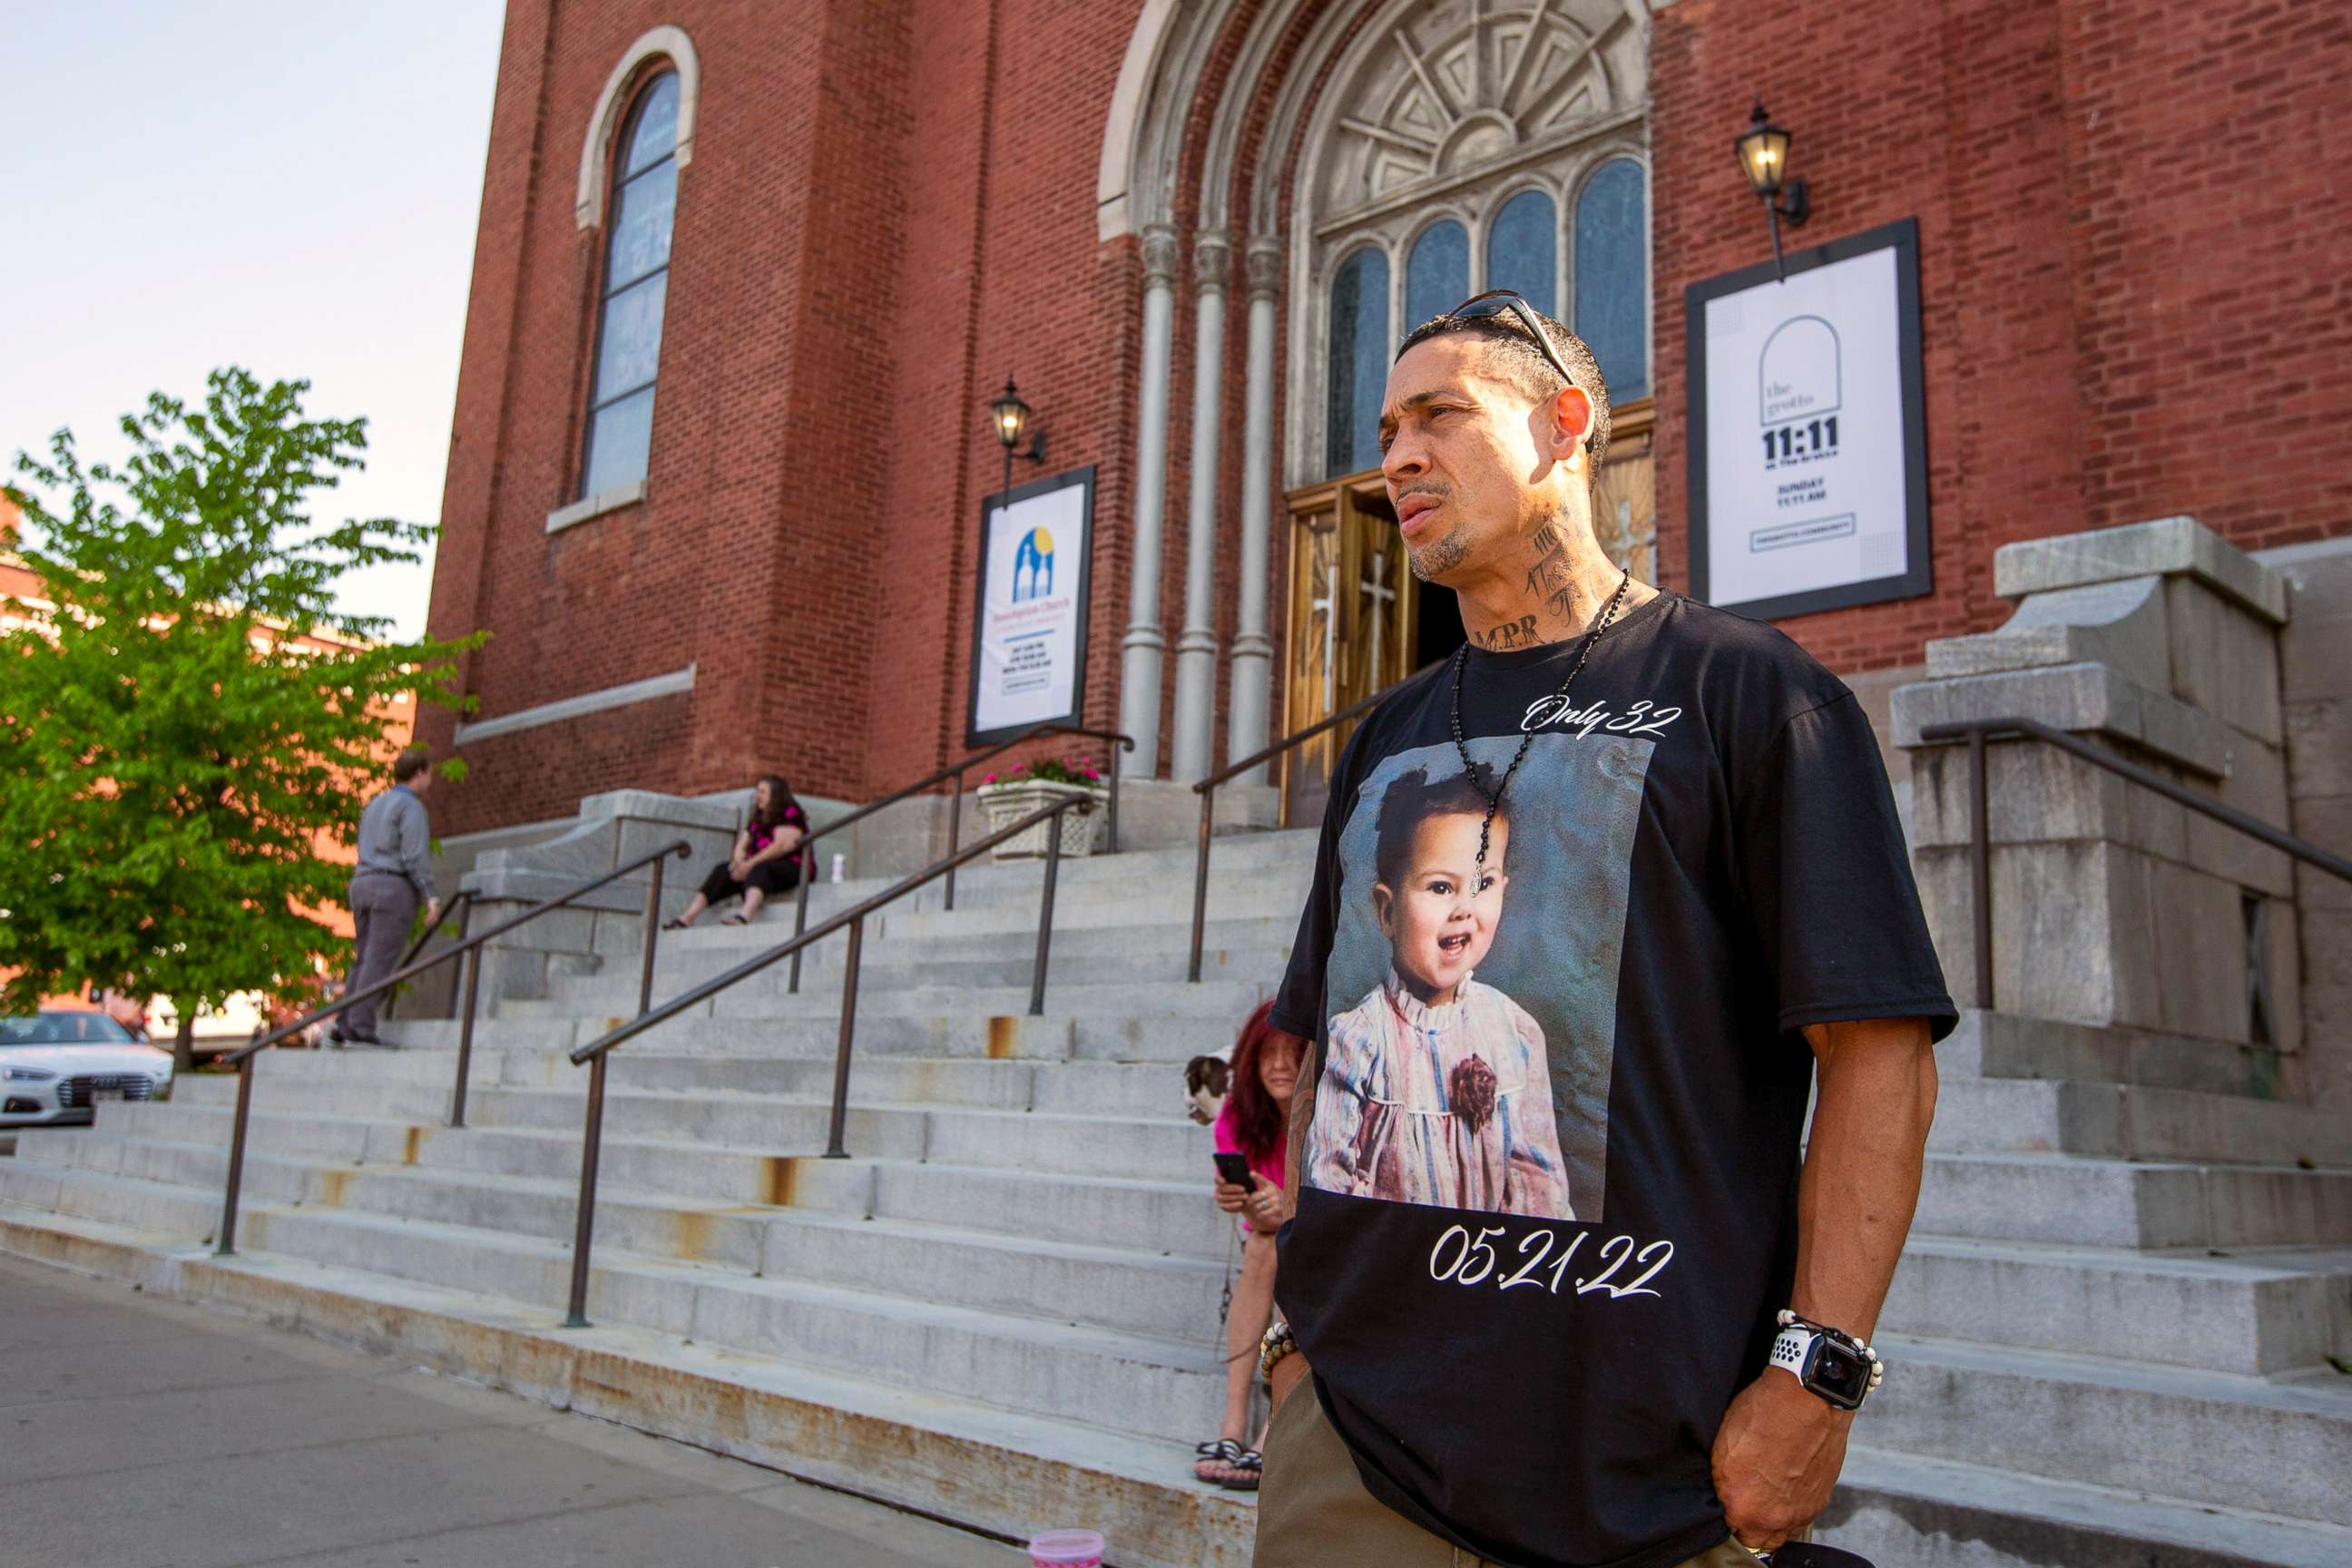 PHOTO: Enrique Owens, a cousin of Roberta Drury, wears a t-shirt with her photograph on it before her funeral service, May 21, 2022, in Syracuse, N.Y. Drury was one of 10 killed during a mass shooting at a supermarket last week in Buffalo.